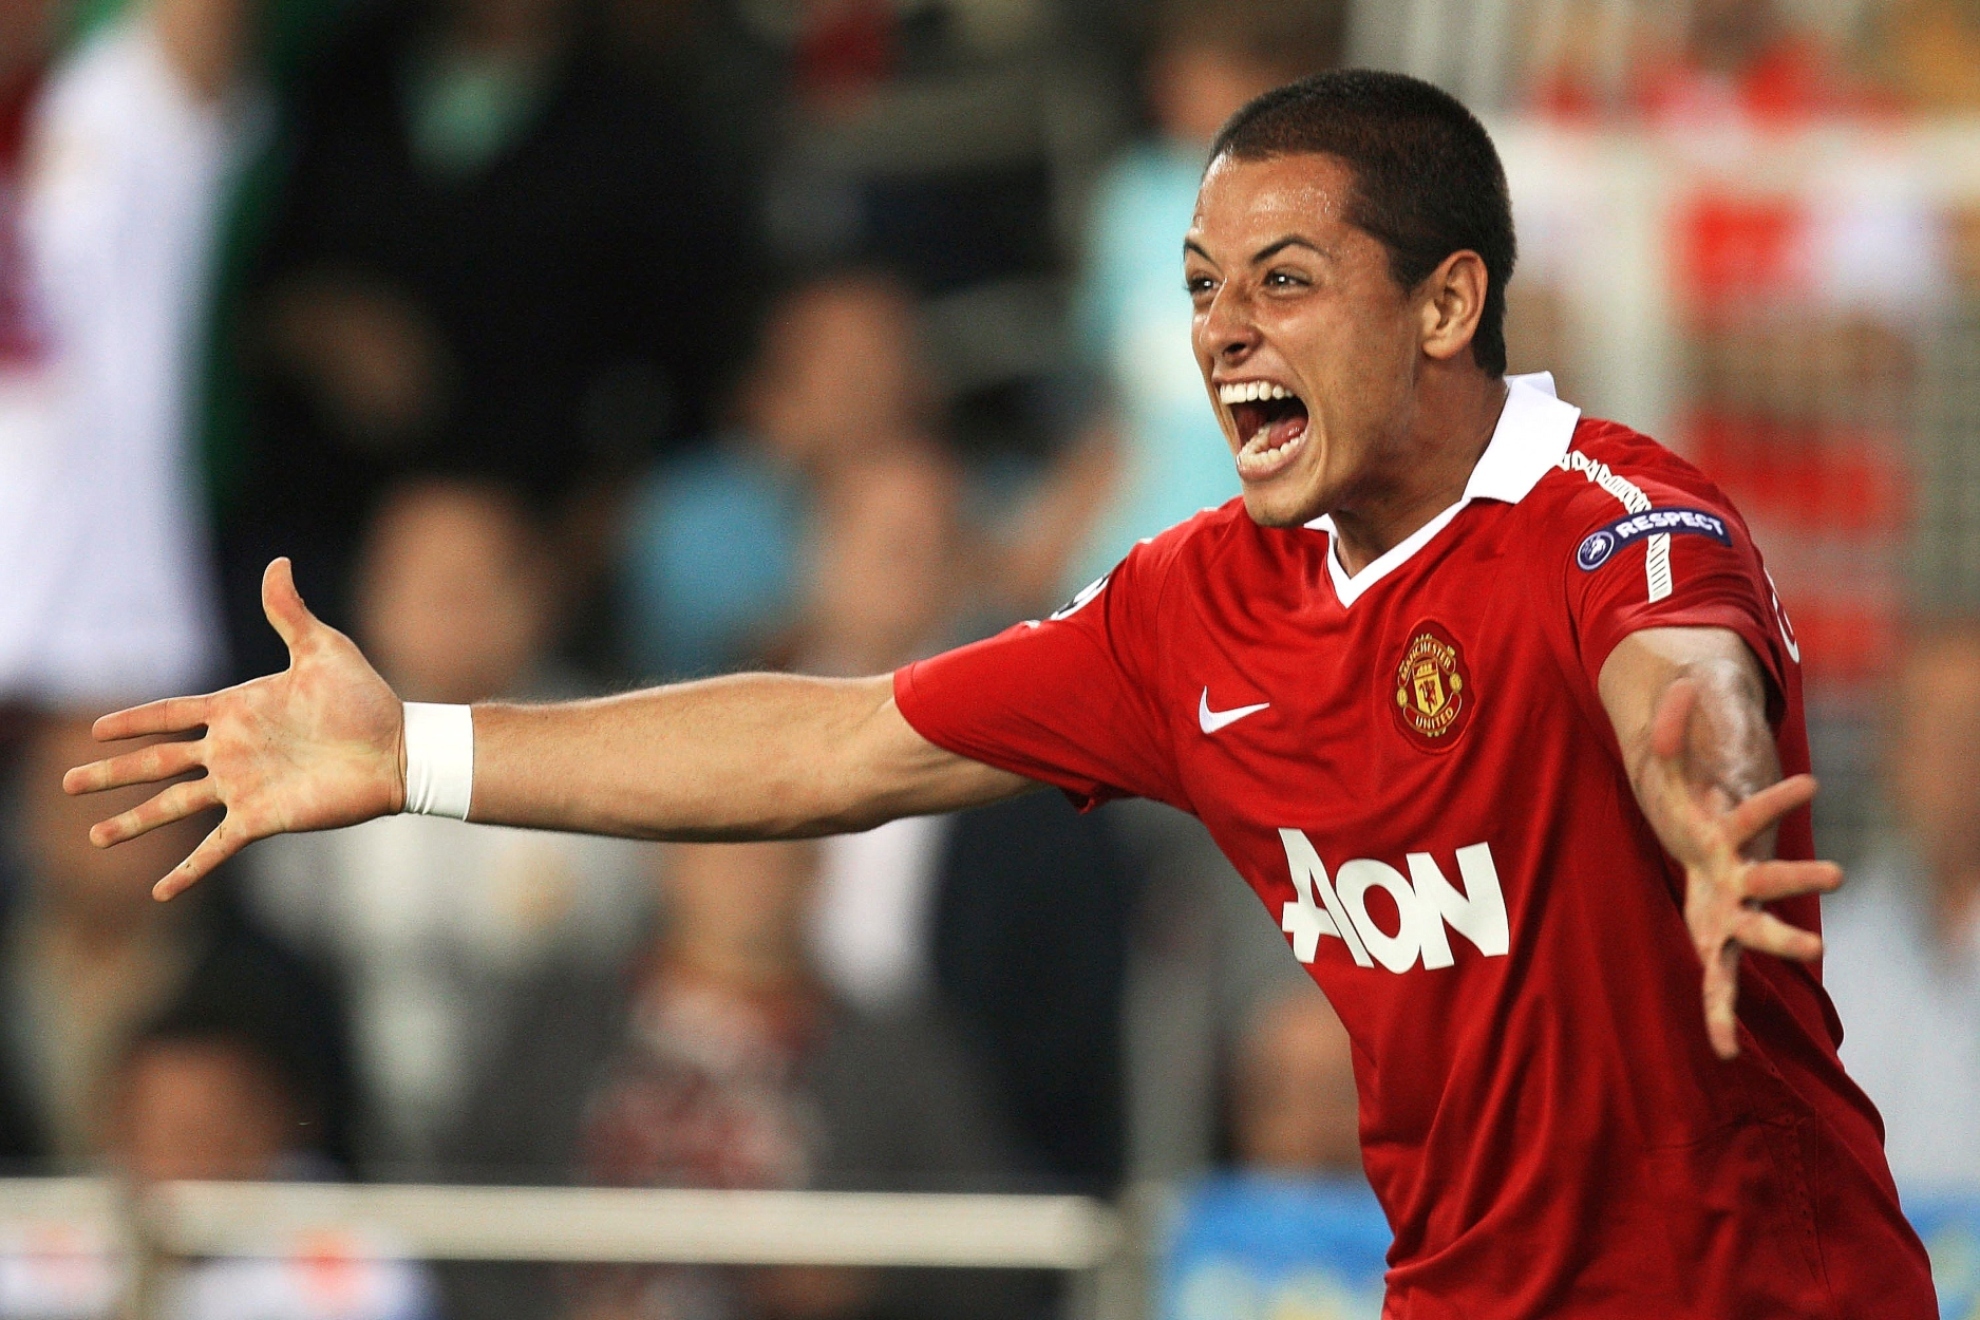 Chicharito during his time with Manchester United